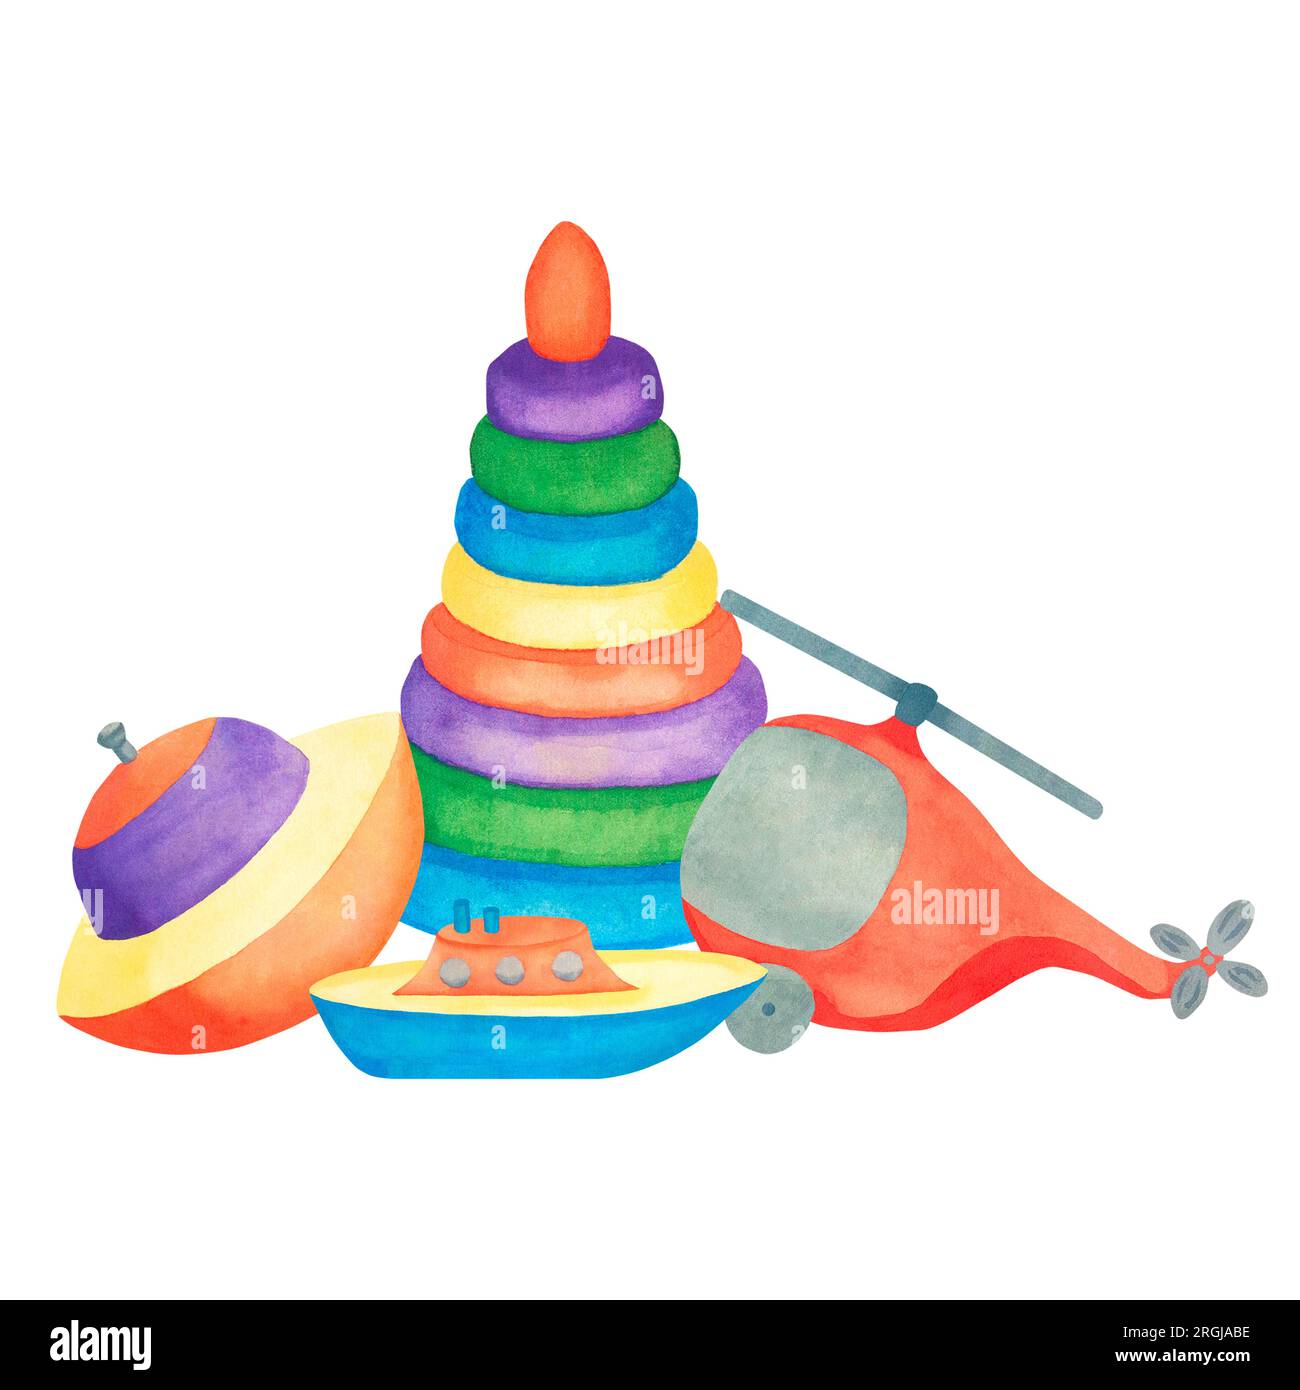 preschool art lesson background with copy space - colorful paper, pencils,  glue and scissors Stock Photo